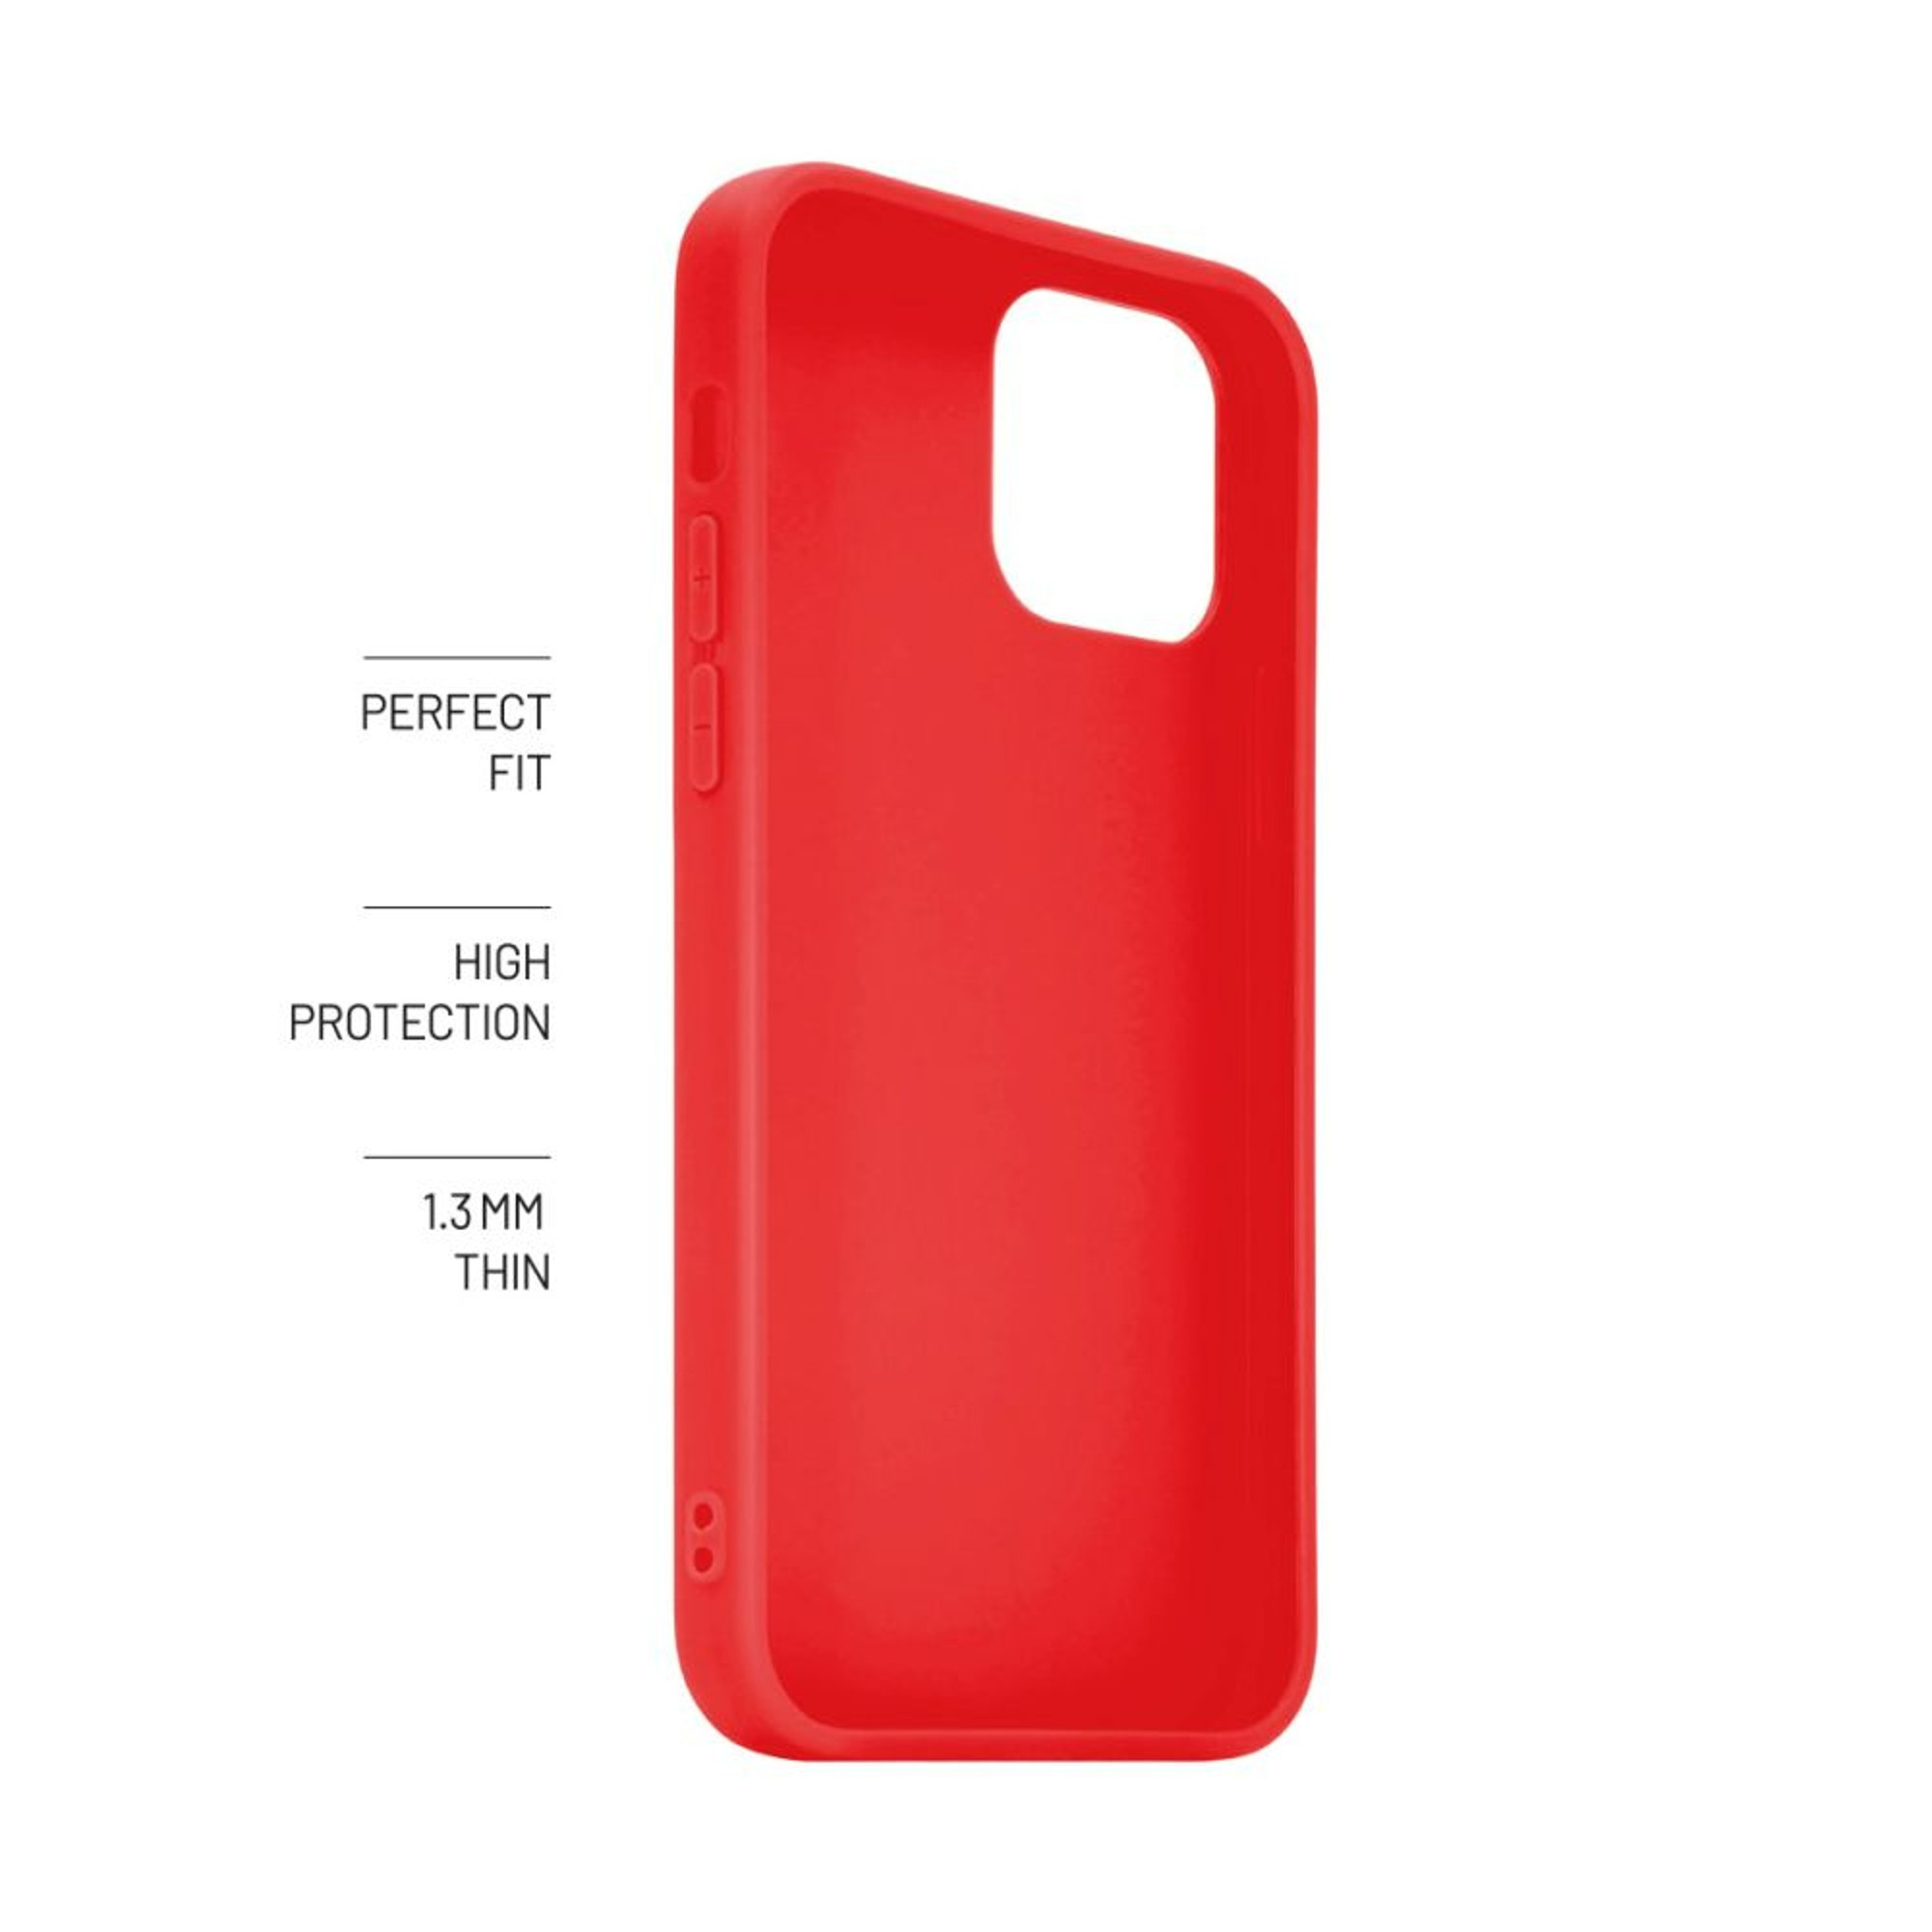 Lite, Story Backcover, 13 Rot FIXST-1097-RD, Soft-Touch FIXED Xiaomi,